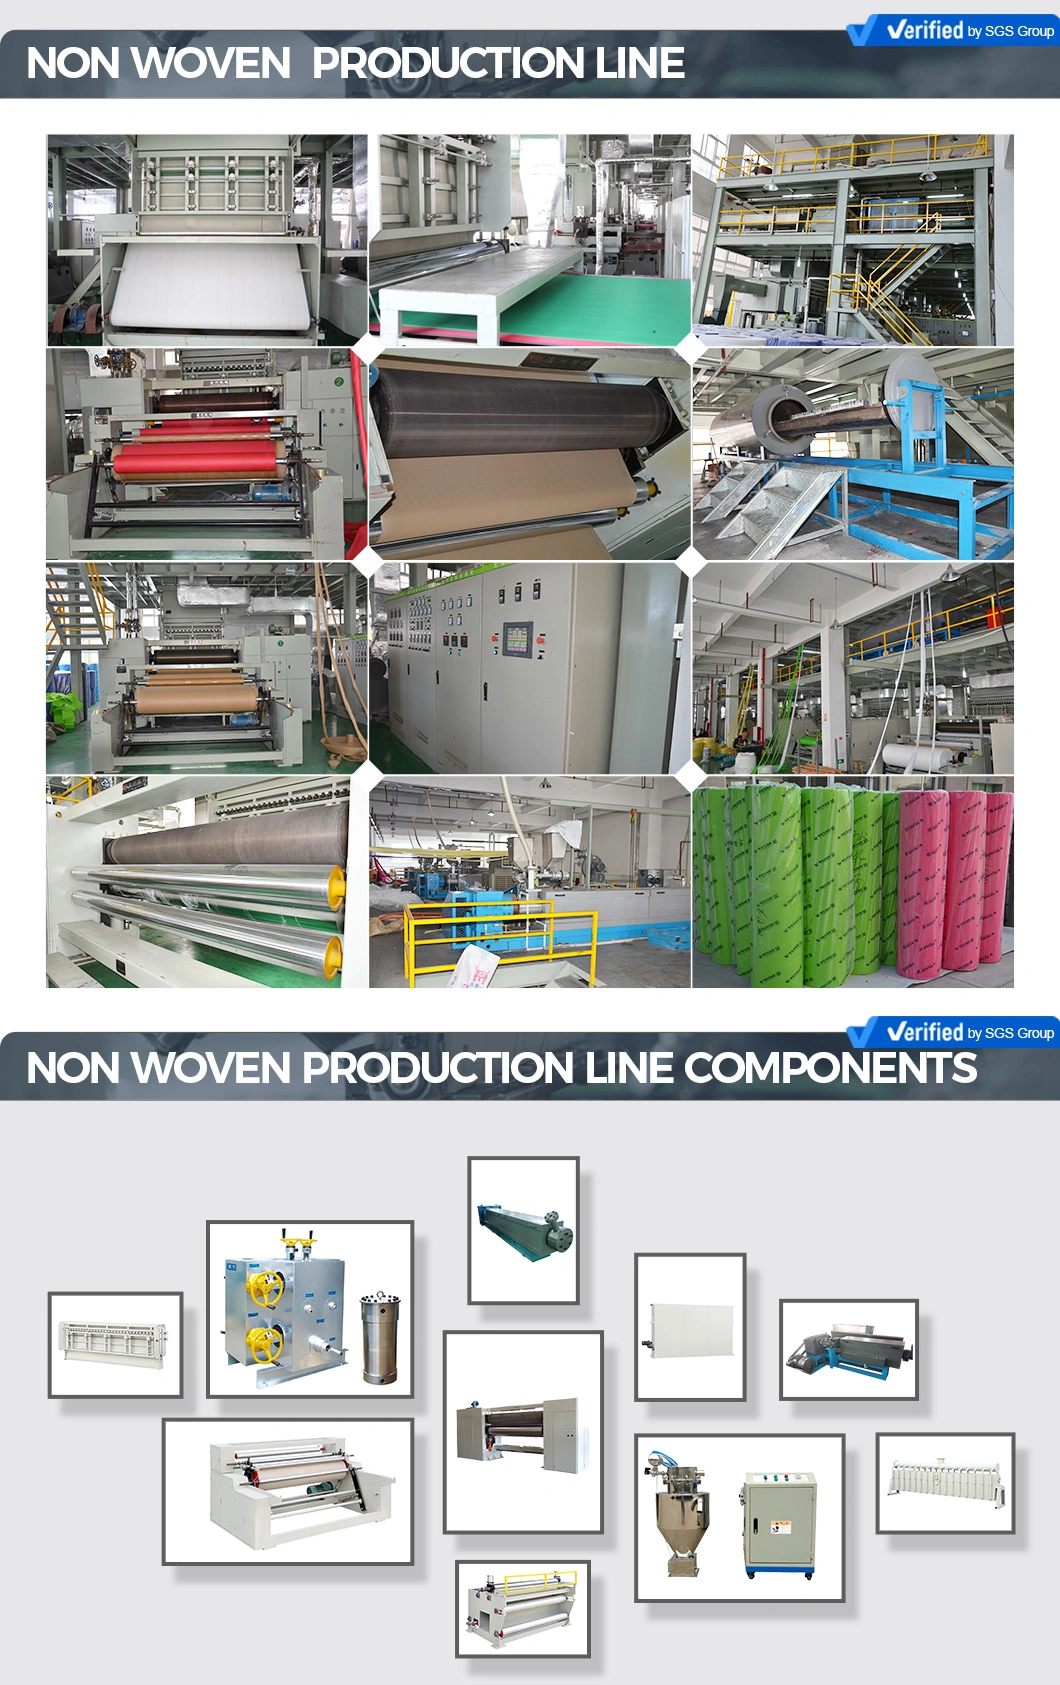 Hot Selling Yp-1.6m Non Woven Production Line with Automatic for Surgical/Medical/Disposable